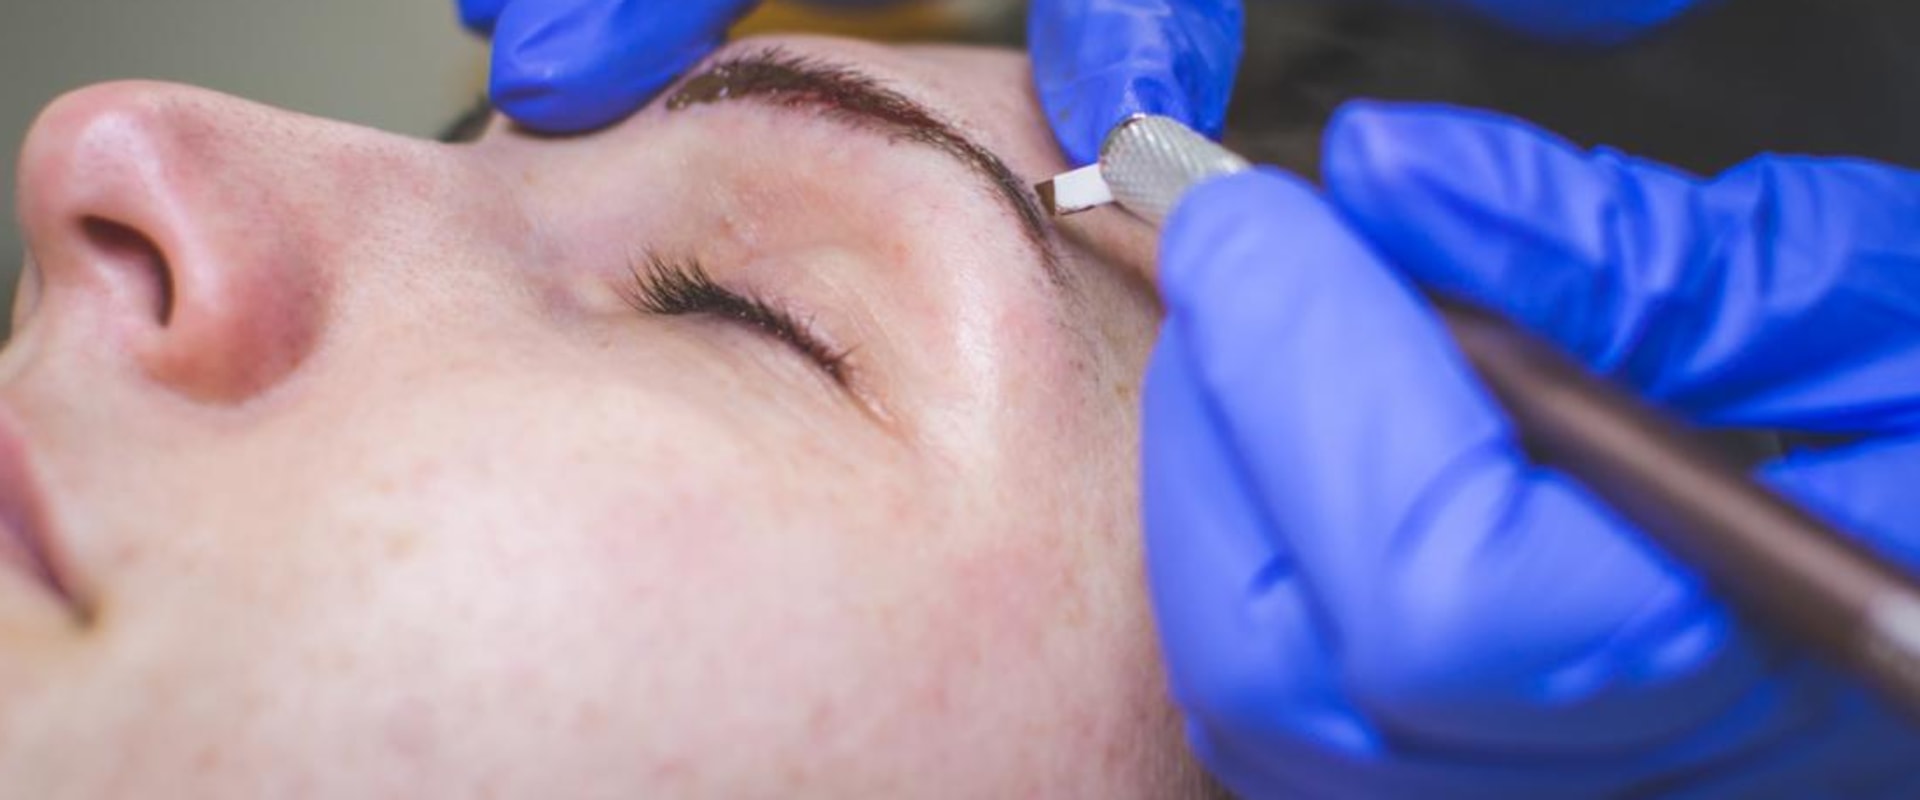 What is the side effect of eyebrow tattooing?